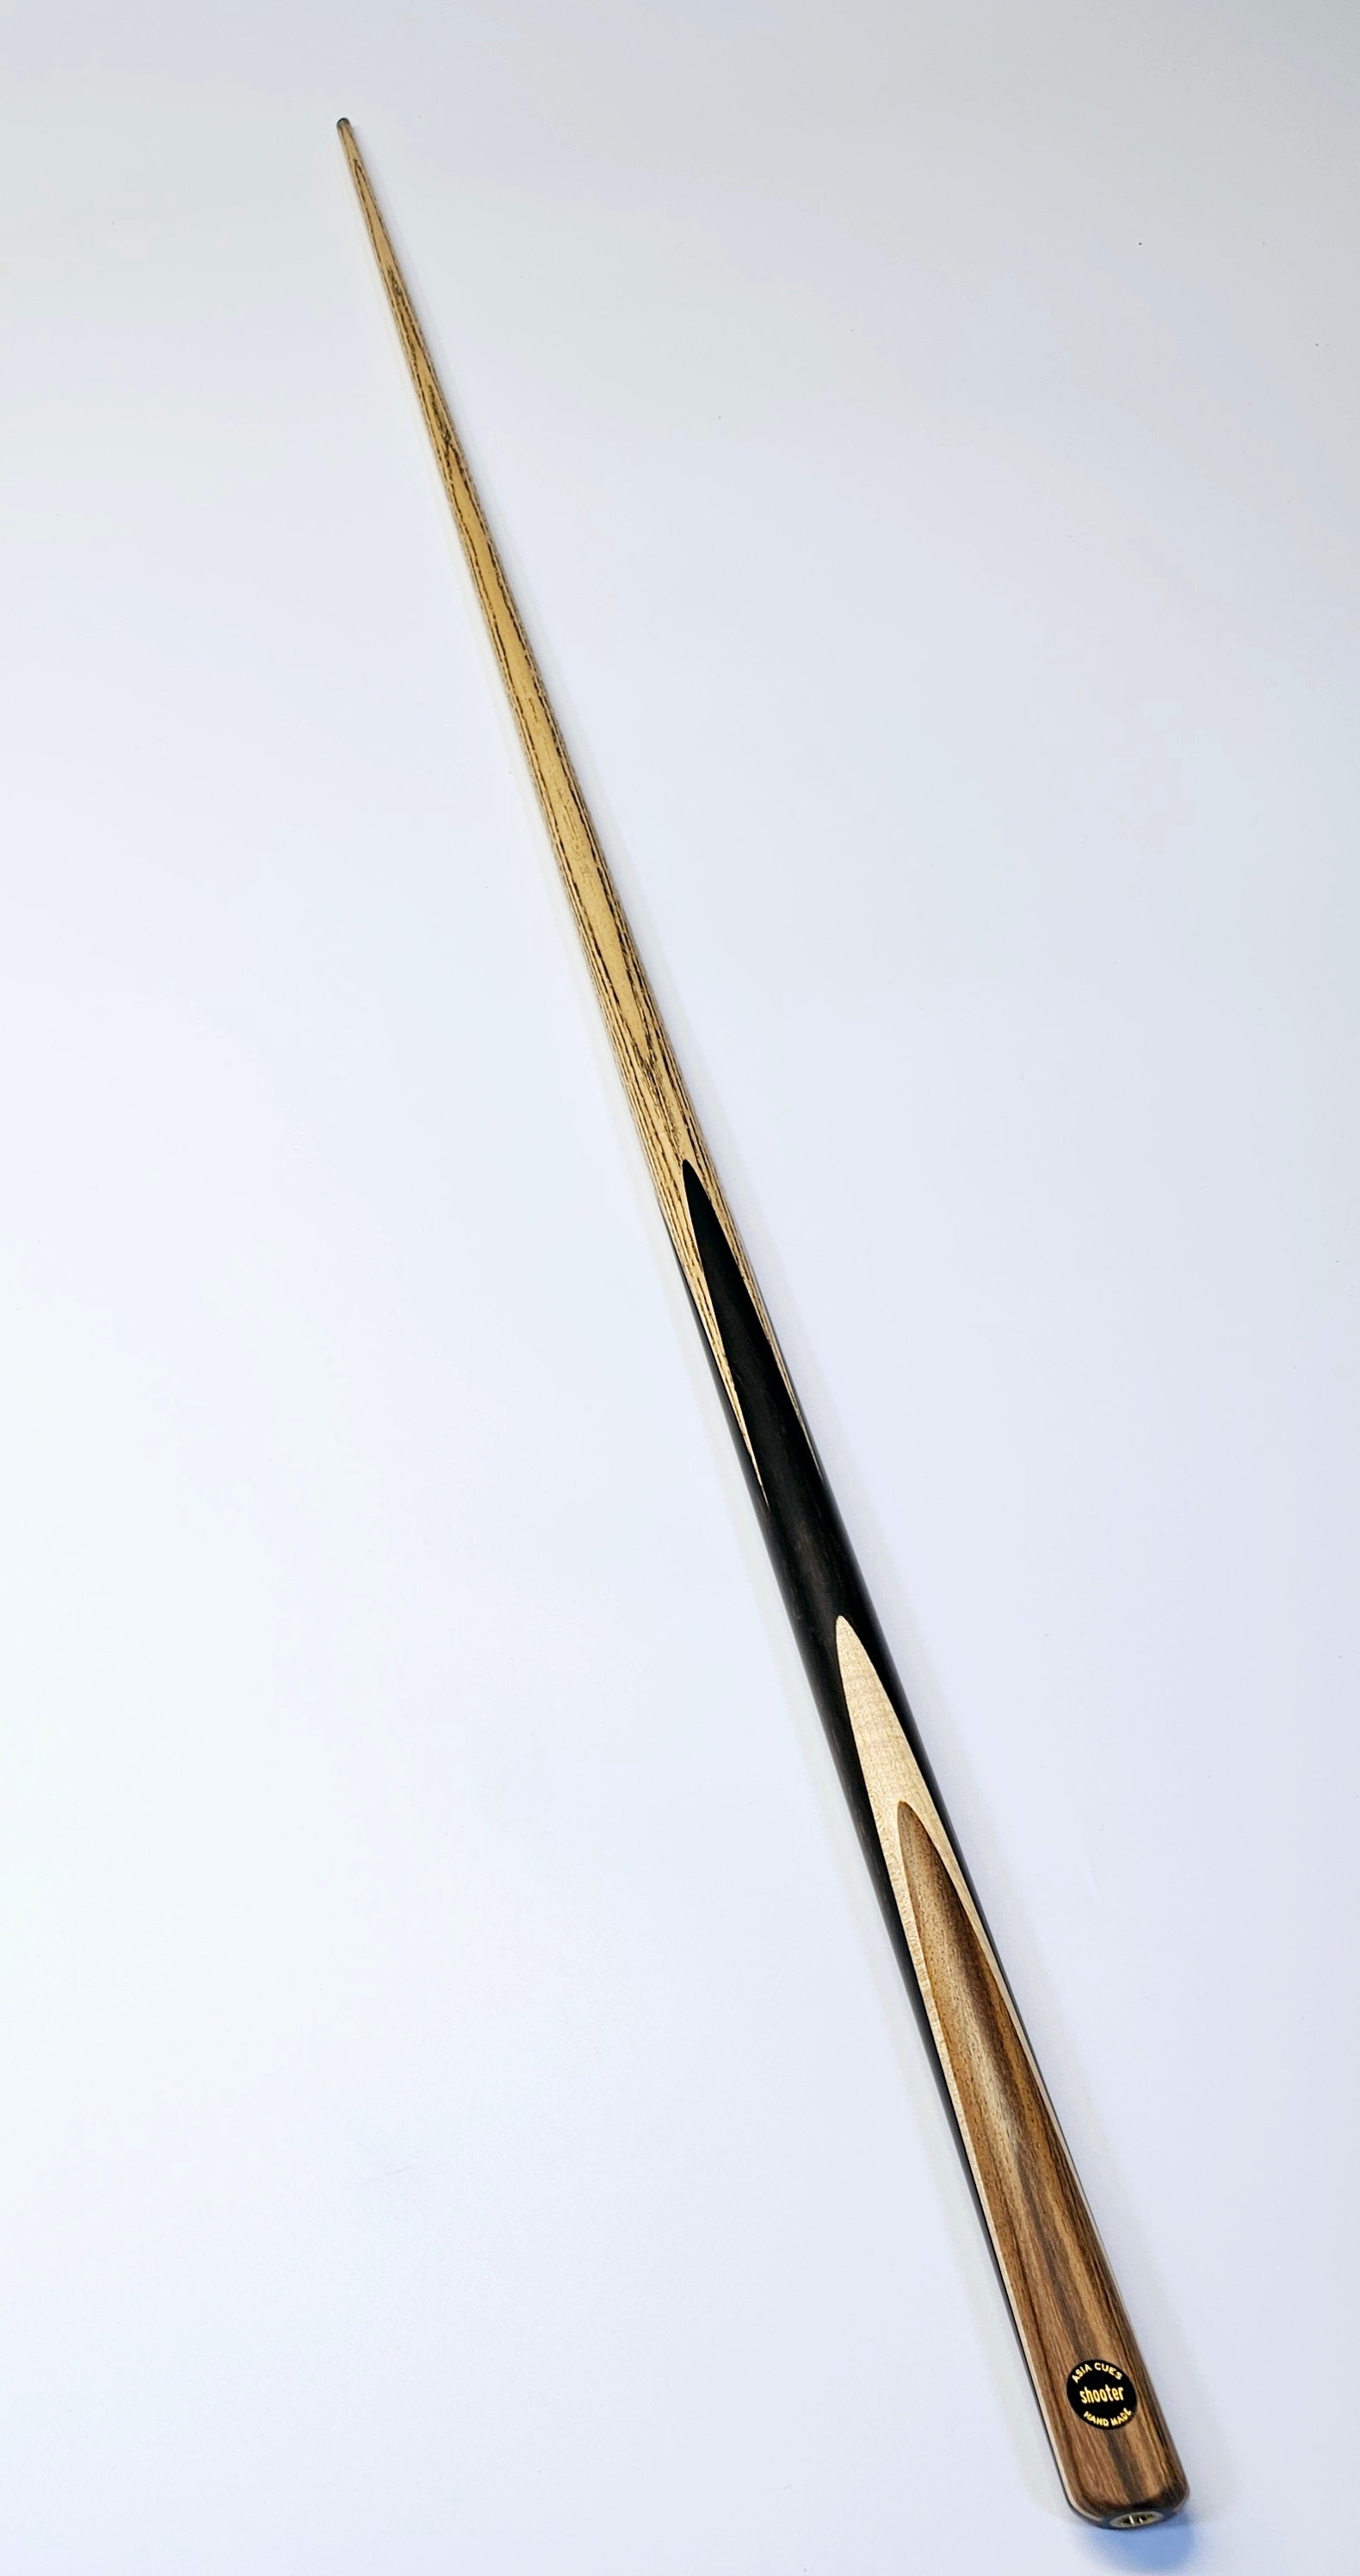 Asia Cues Shooter - One Piece Snooker Cue 9.7mm Tip, 17.6oz, 57"